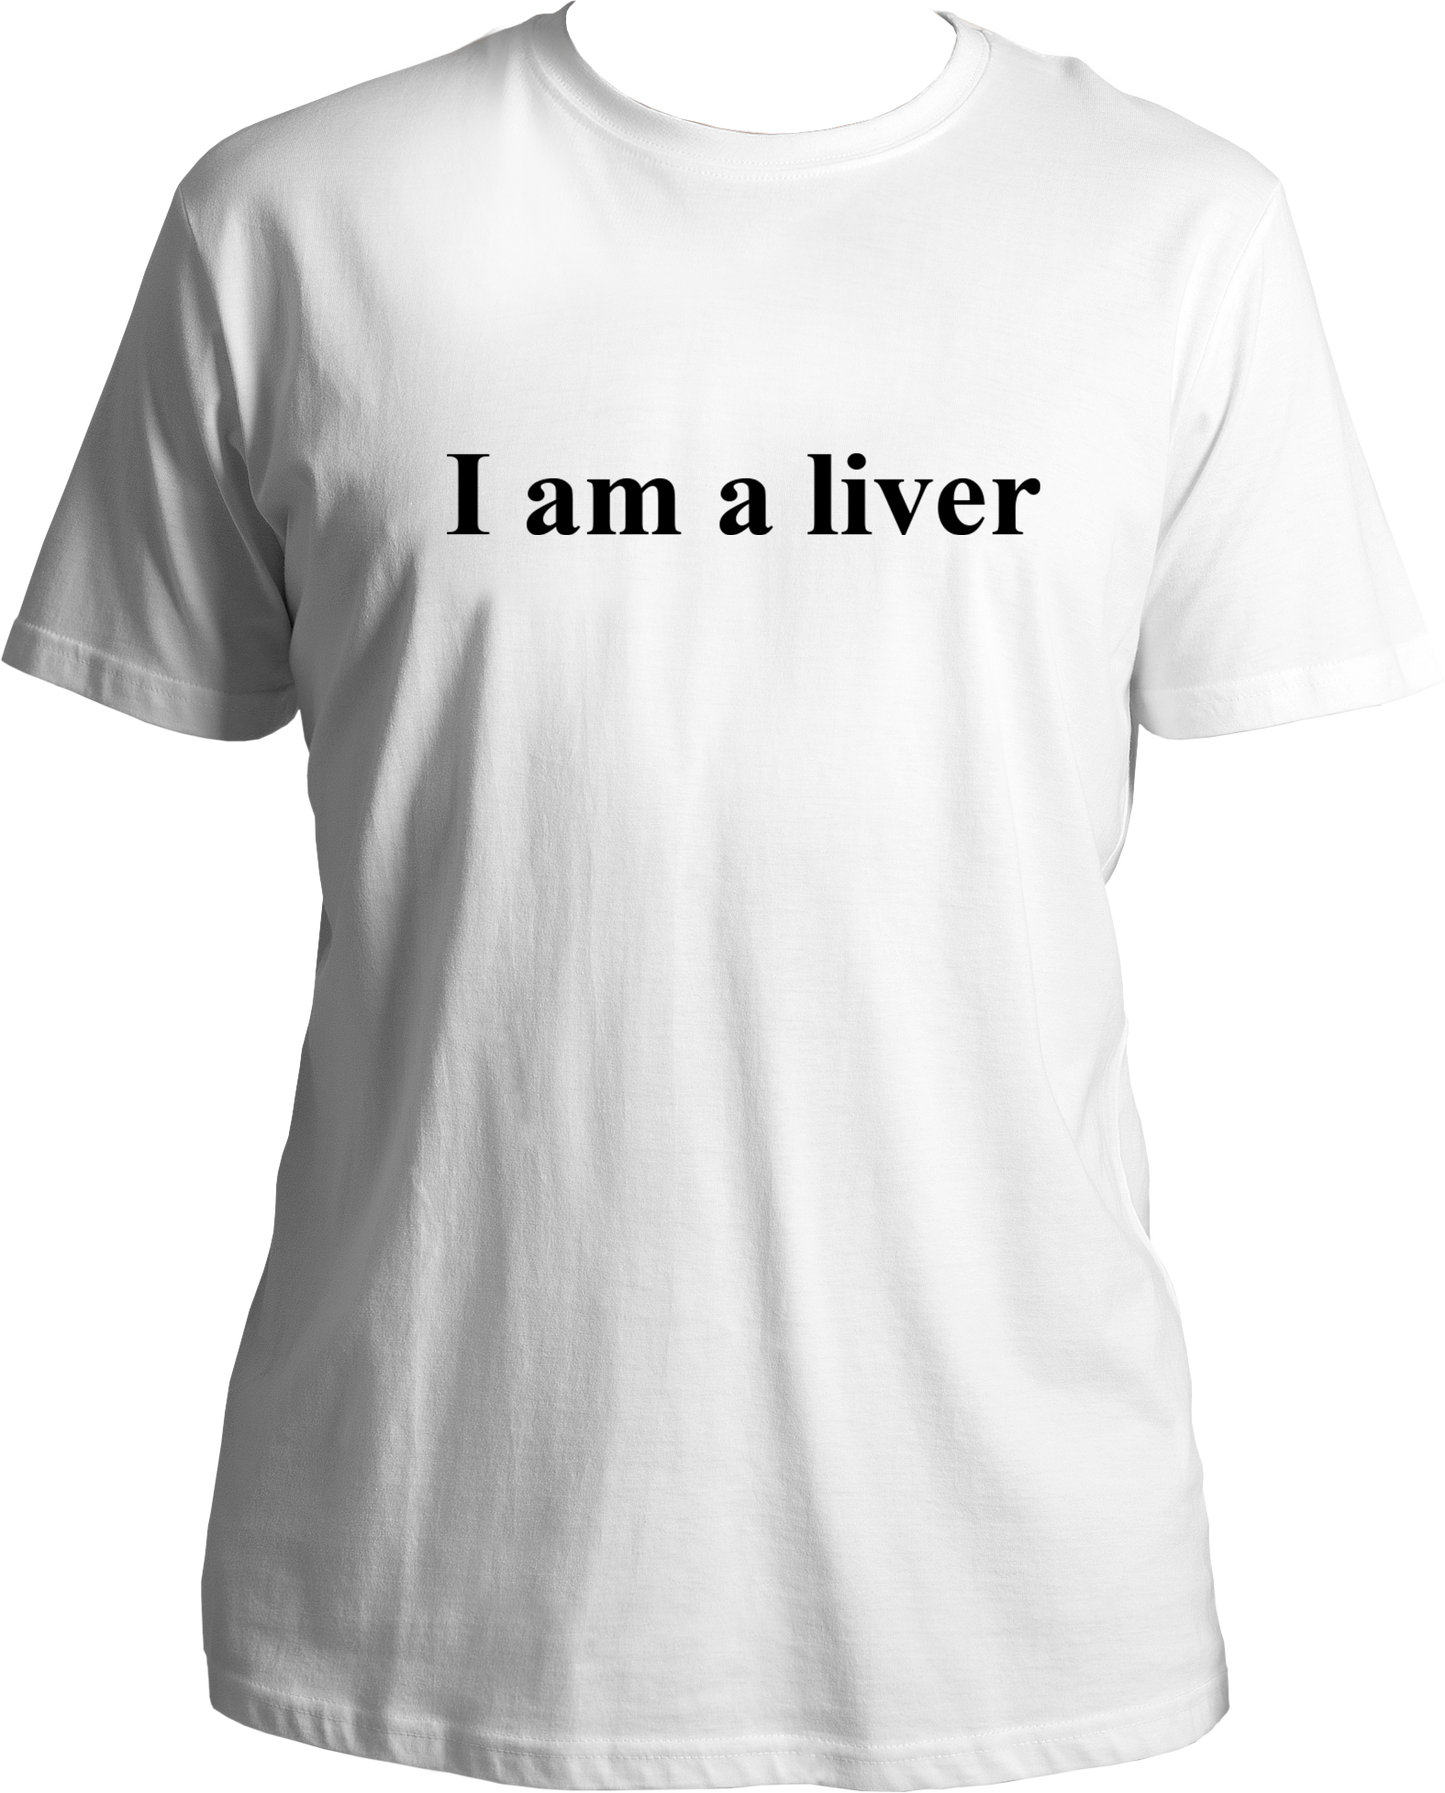 Famous Orry's Famous quote, I Am A Liver Unisex Cotton T-Shirt for you all. So if you also like orry who is a liver, this is a must wear for you. Grab your I Am A Liver T-Shirt Right now